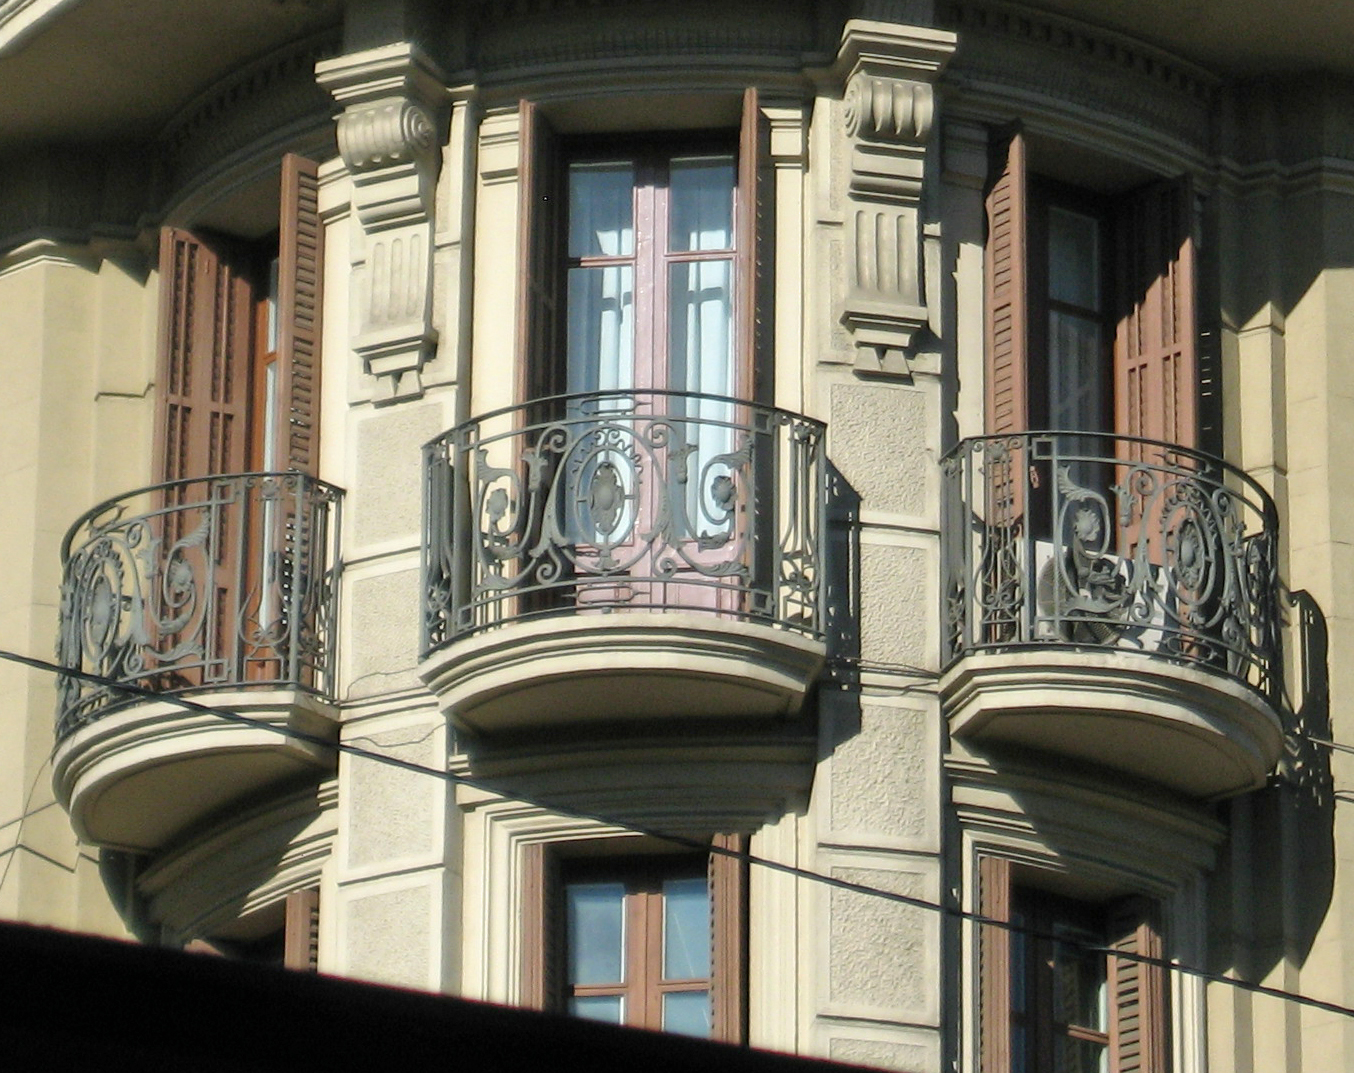 Balcony arches in Barcelona